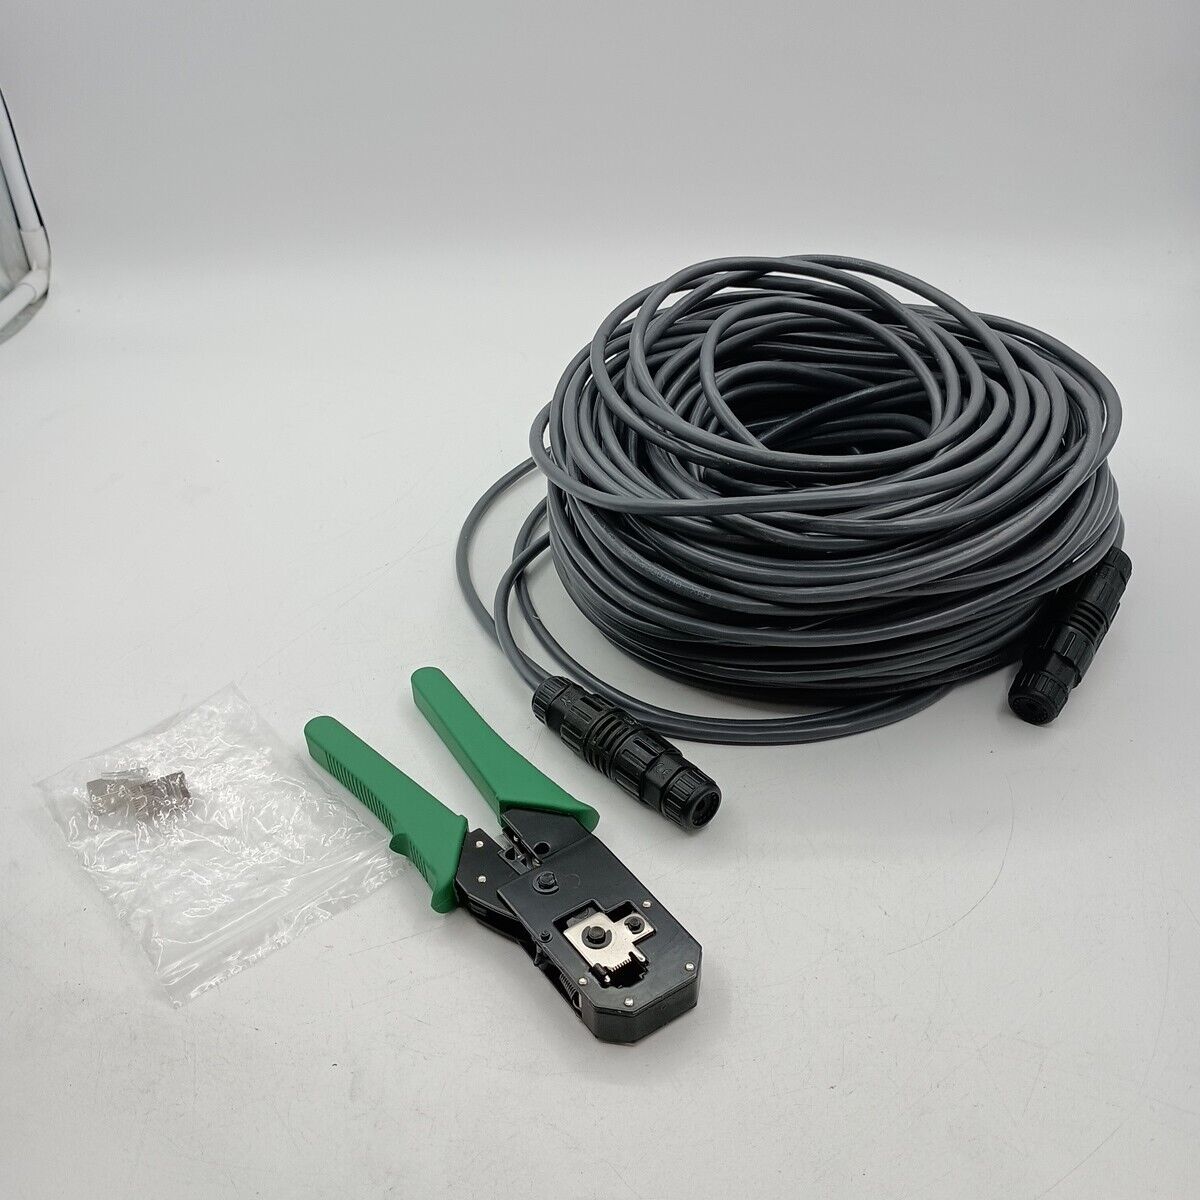 Starlink Cable Extension & Repair Kit, Extension to 150ft, Starlink Replaceme...